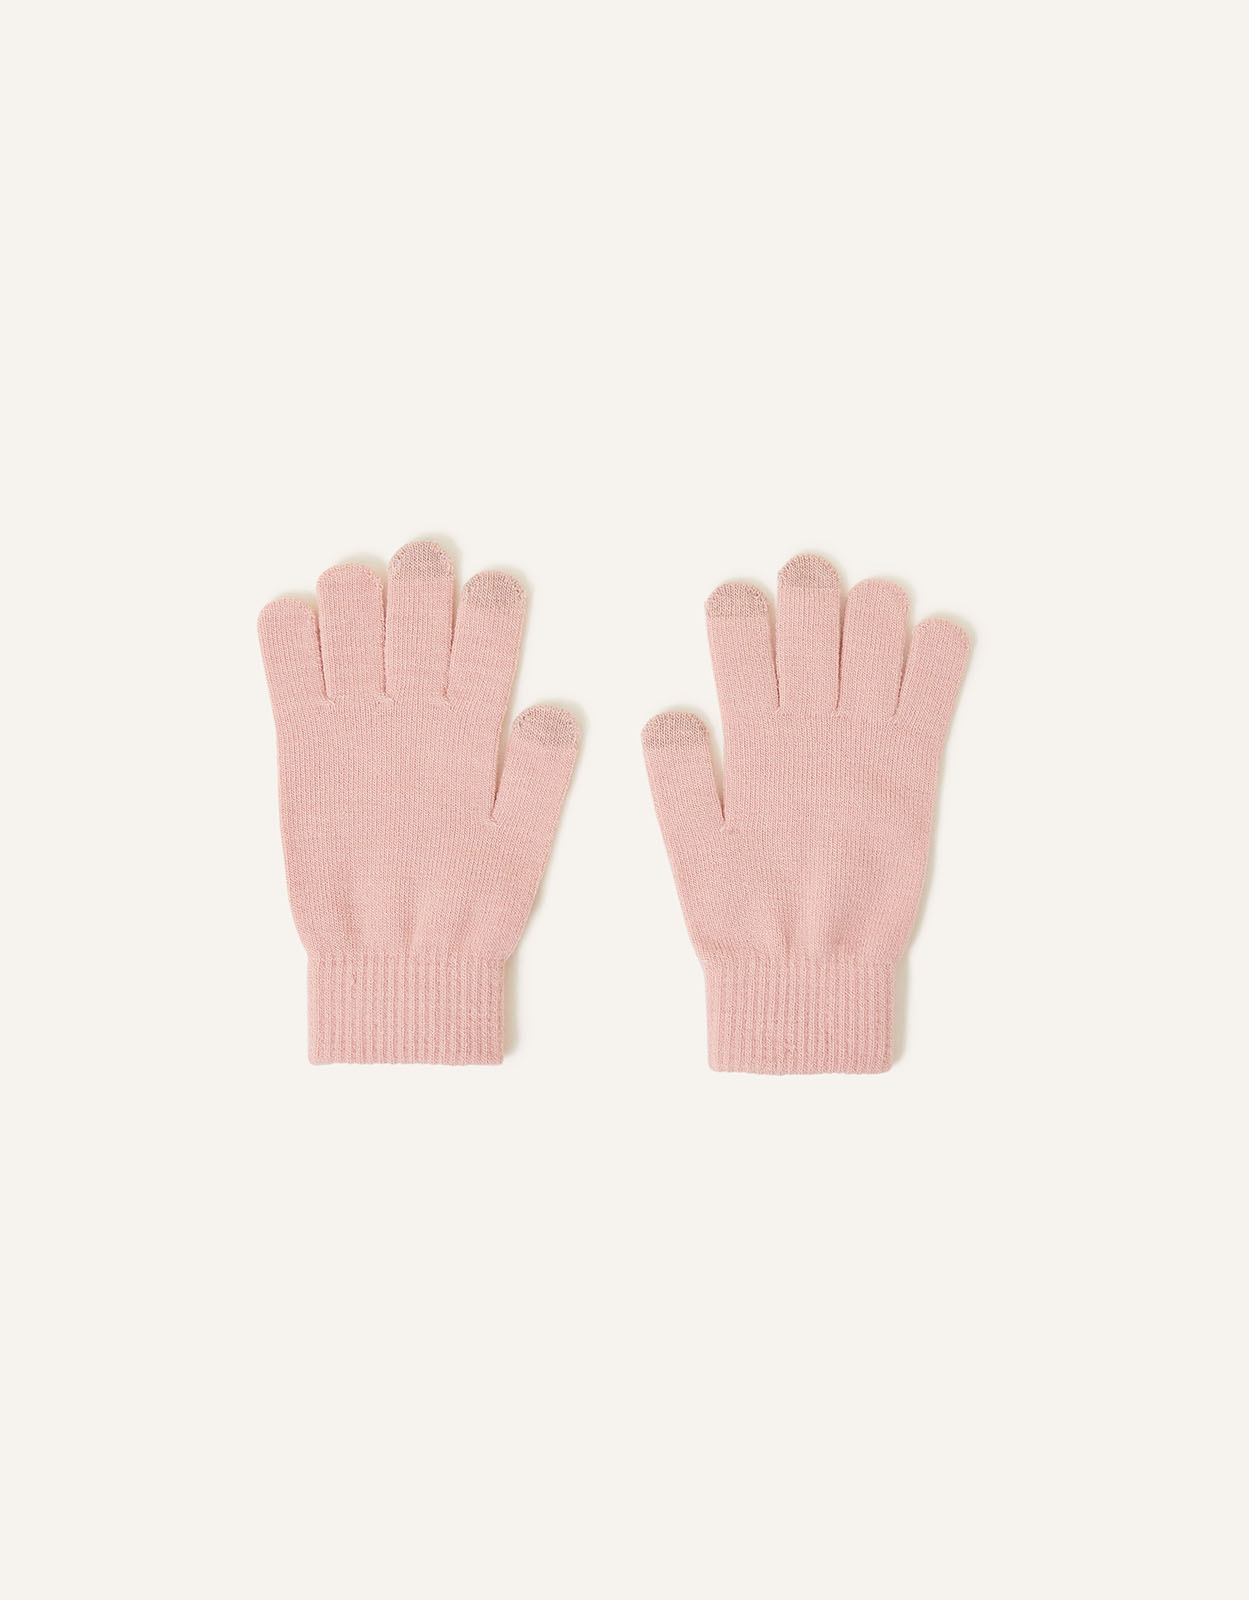 Accessorize Pink Super-Stretchy Touchscreen Gloves Set of Two, Size: One Size